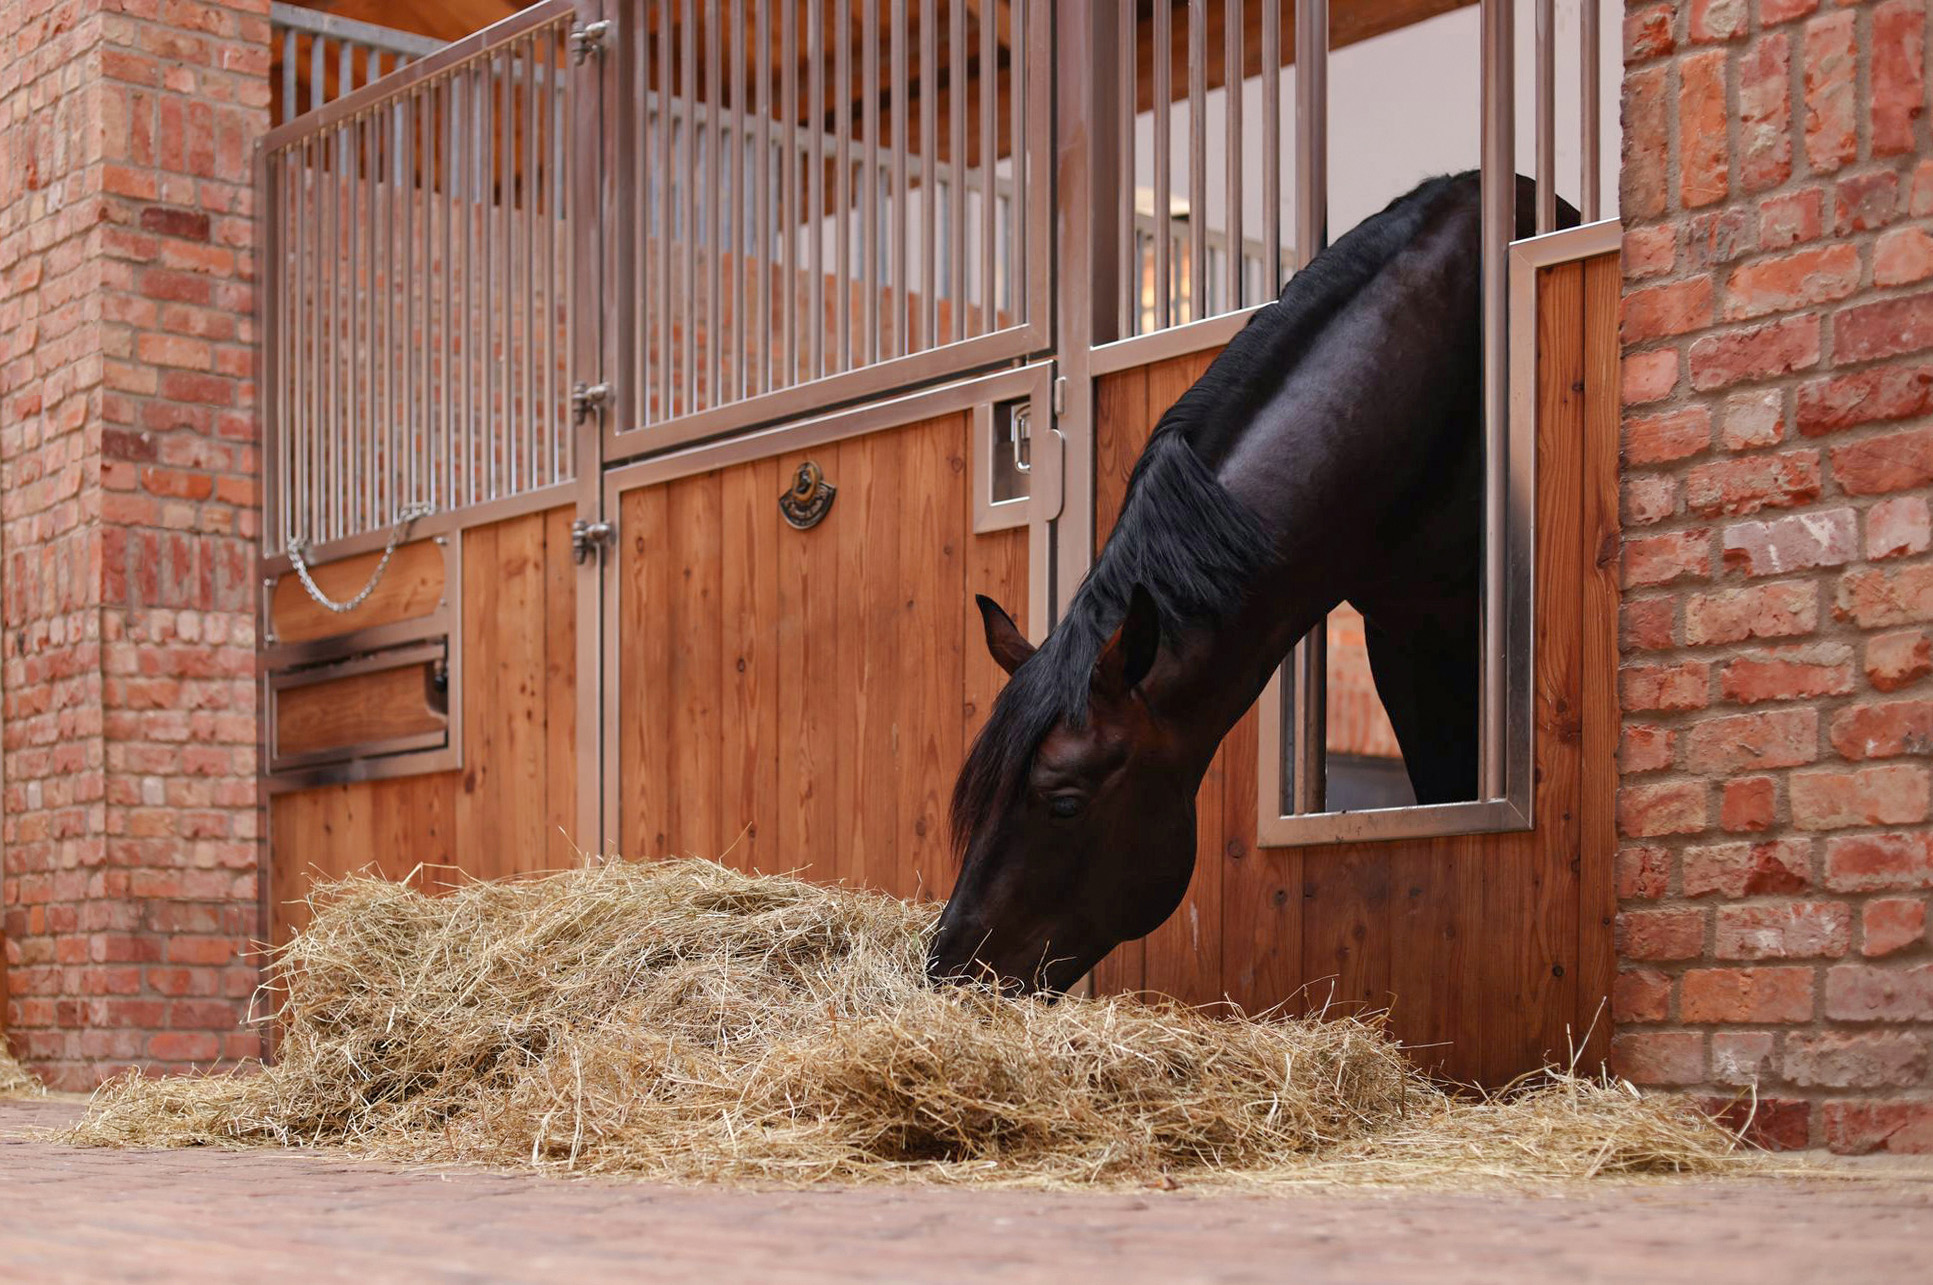 Stallion standing in his box and eating hay in the stable lane